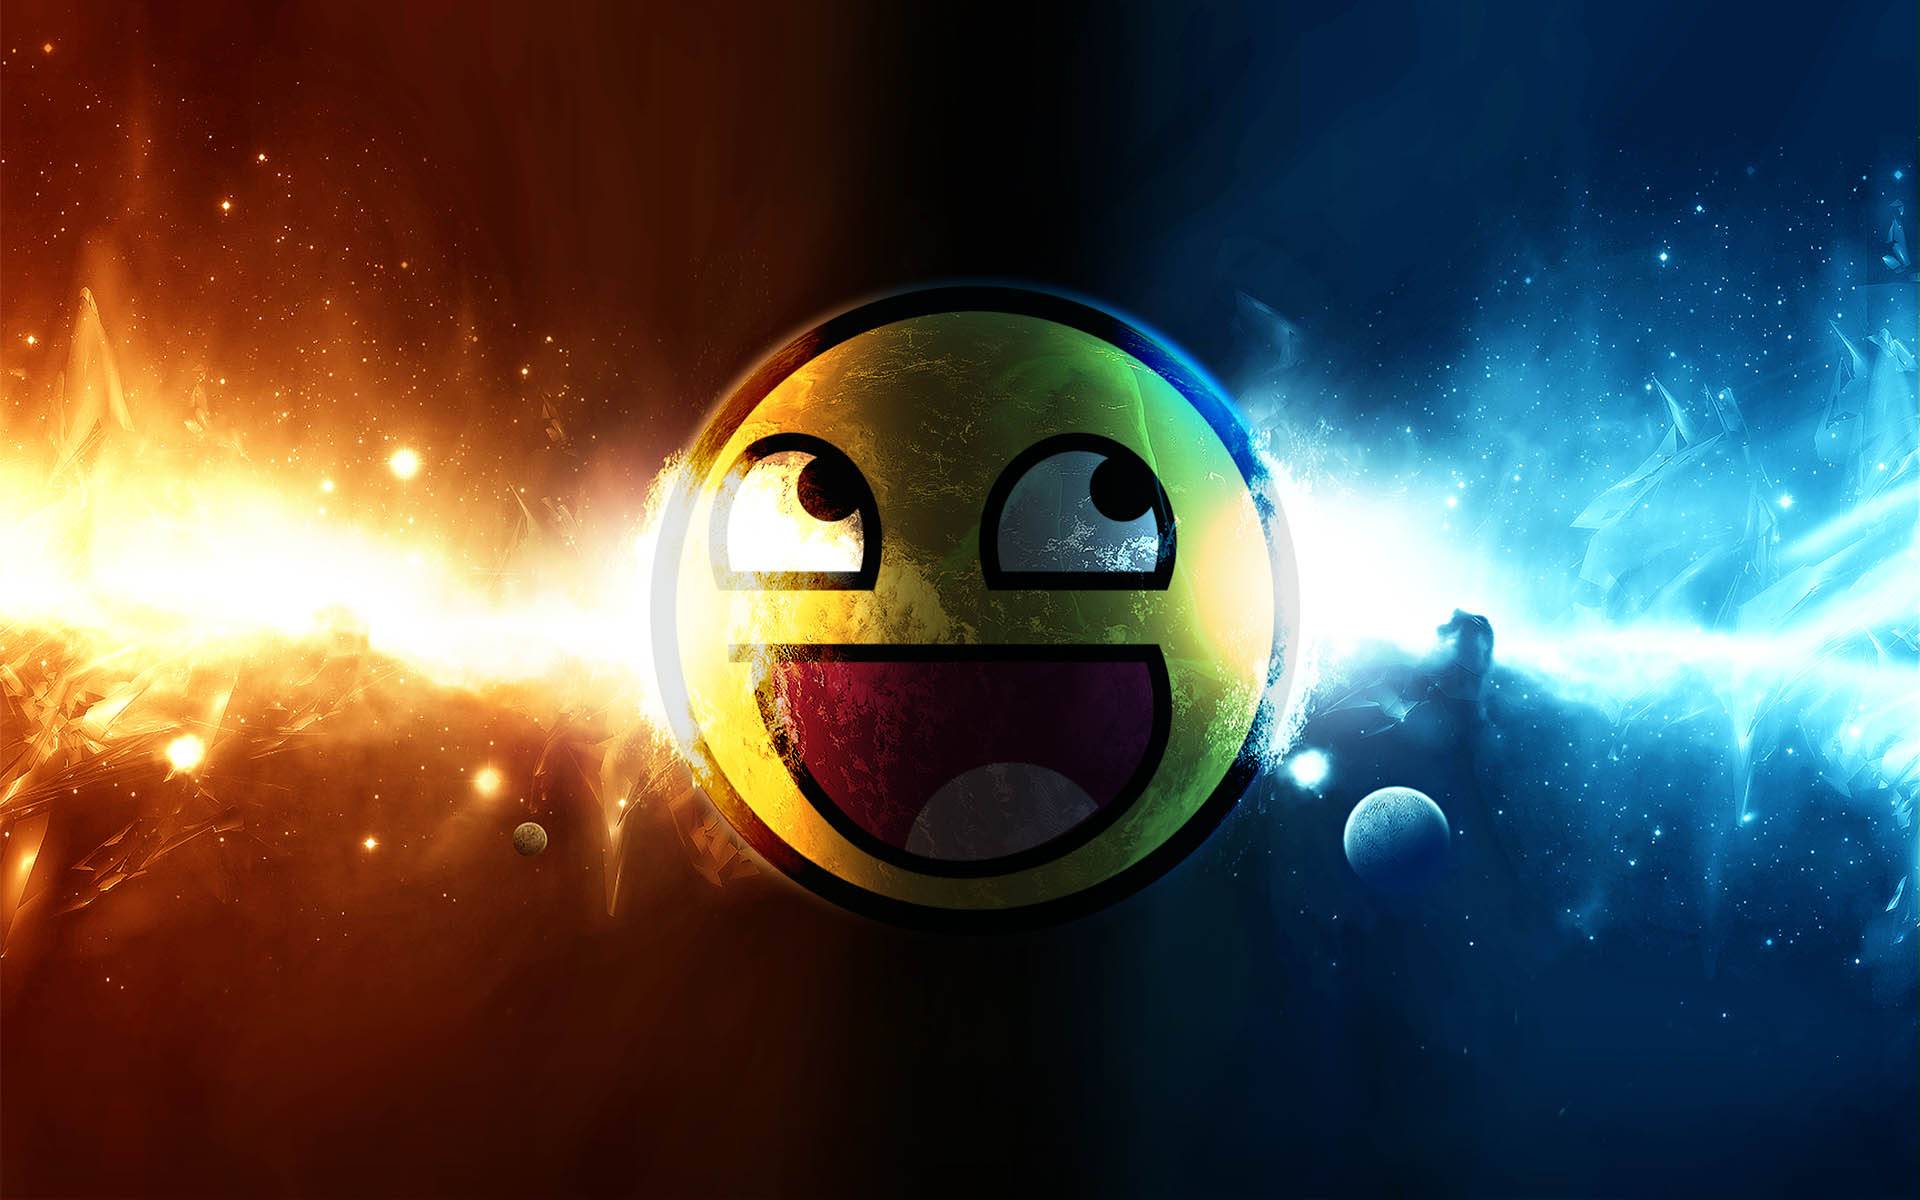 Awesome Smiley Background 2225 Hd Wallpapers in Others   Imagescicom